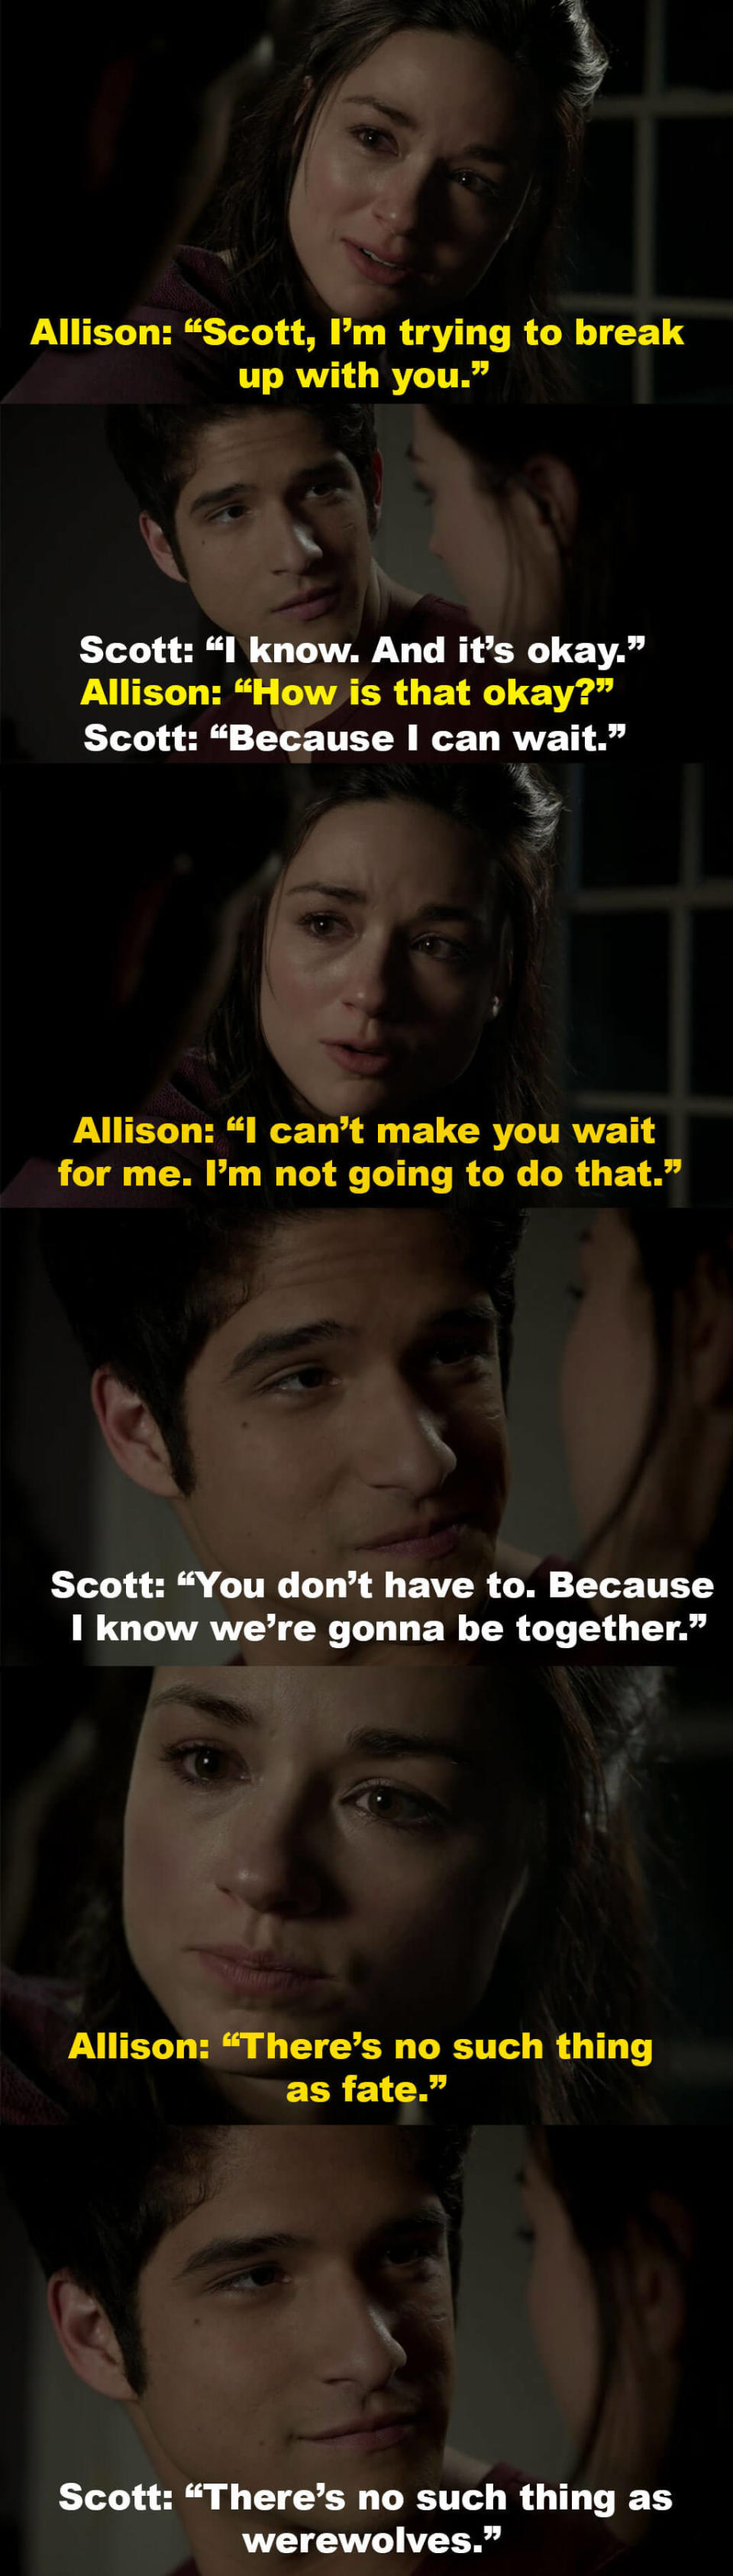 Scott says it's okay that Allison is breaking up with him since he knows they'll be together one day, and Allison tells him she can't ask him to wait for her, and that there's no such thing as fate, but Scott says  there's no such thing as werewolves